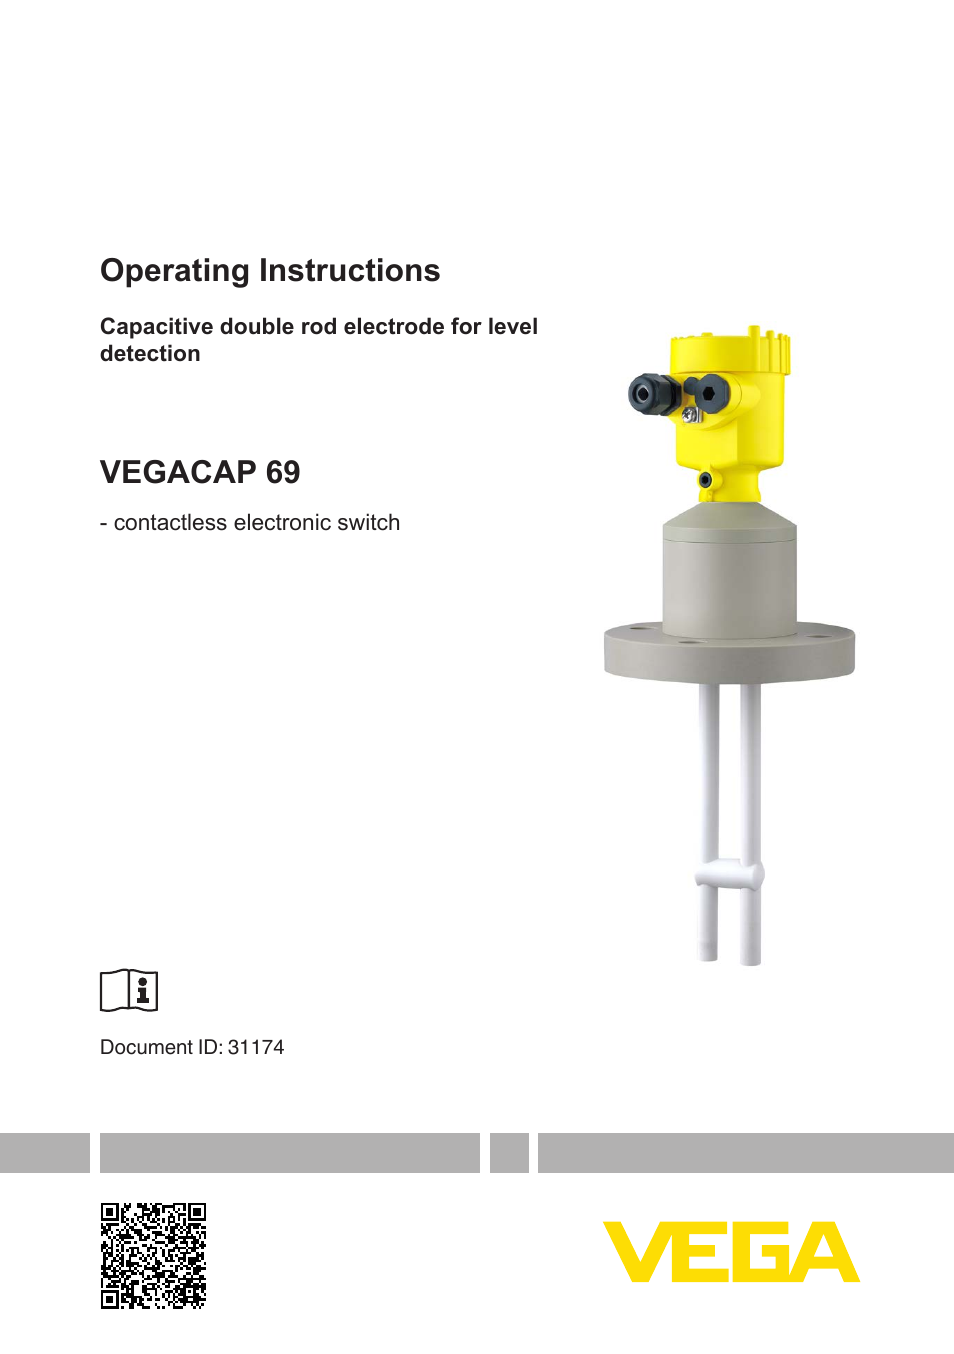 VEGACAP 69 - contactless electronic switch